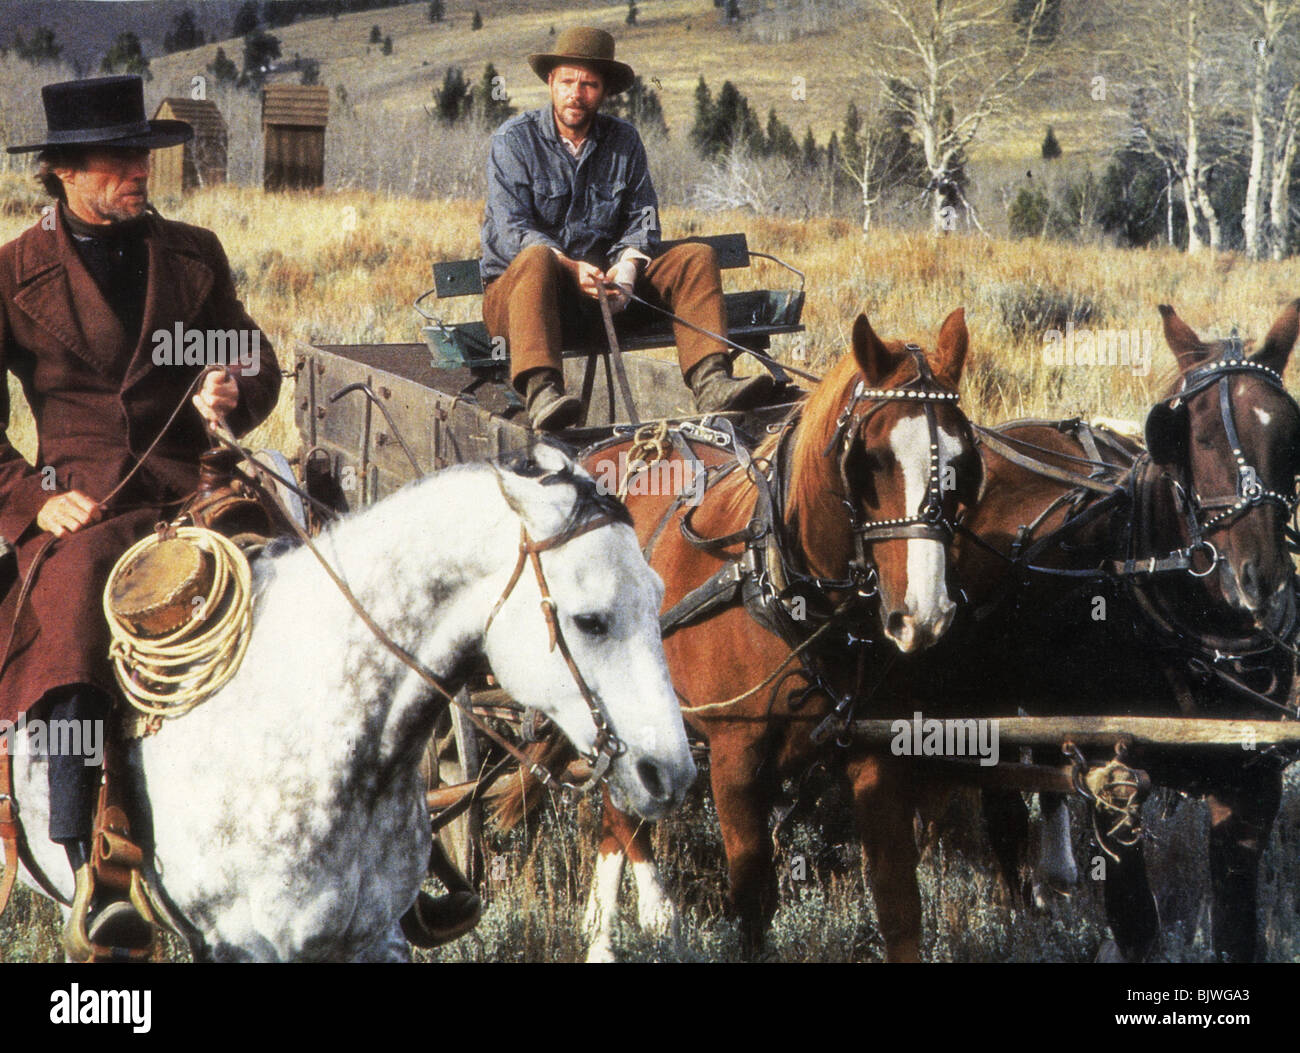 PALE RIDER - 1985 Warner/Malpaso film with Clint Eastwood Stock Photo